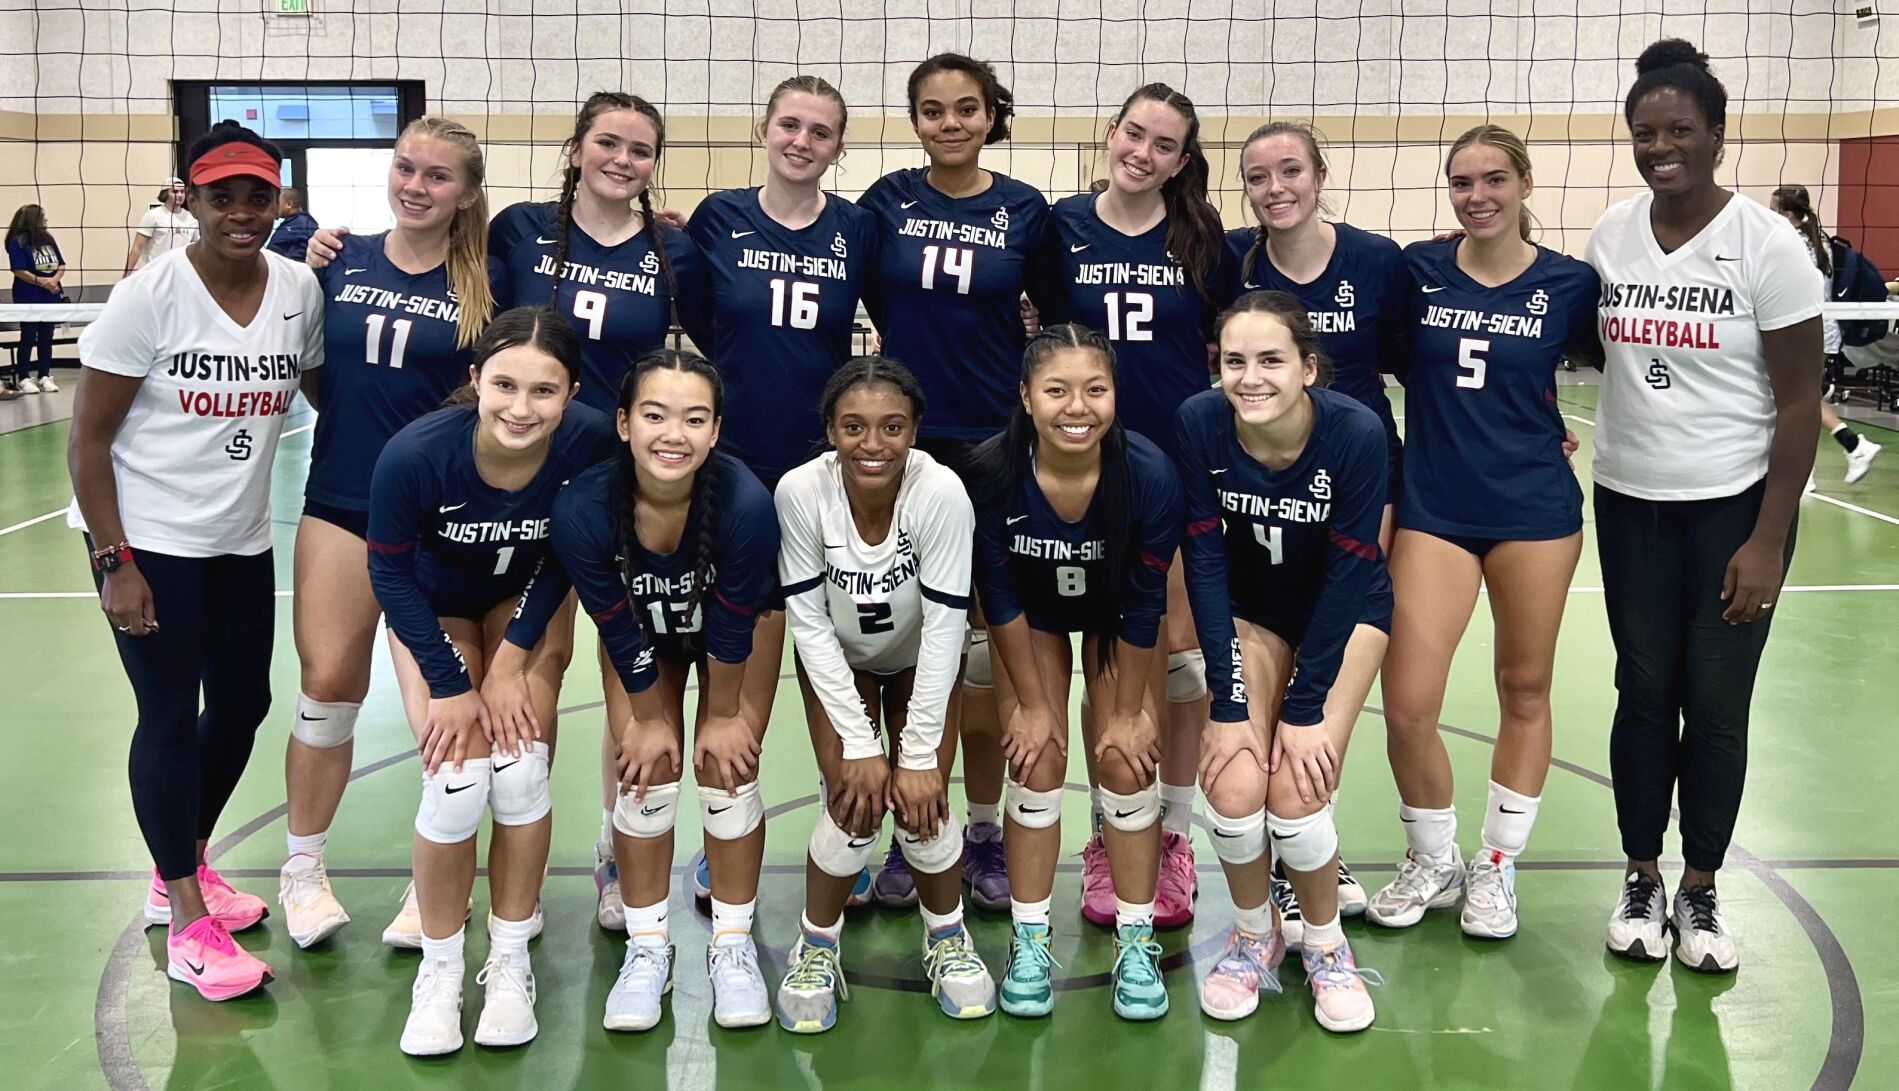 Napa Valley High School Volleyball Braves win Silver Division at Sonoma tourney